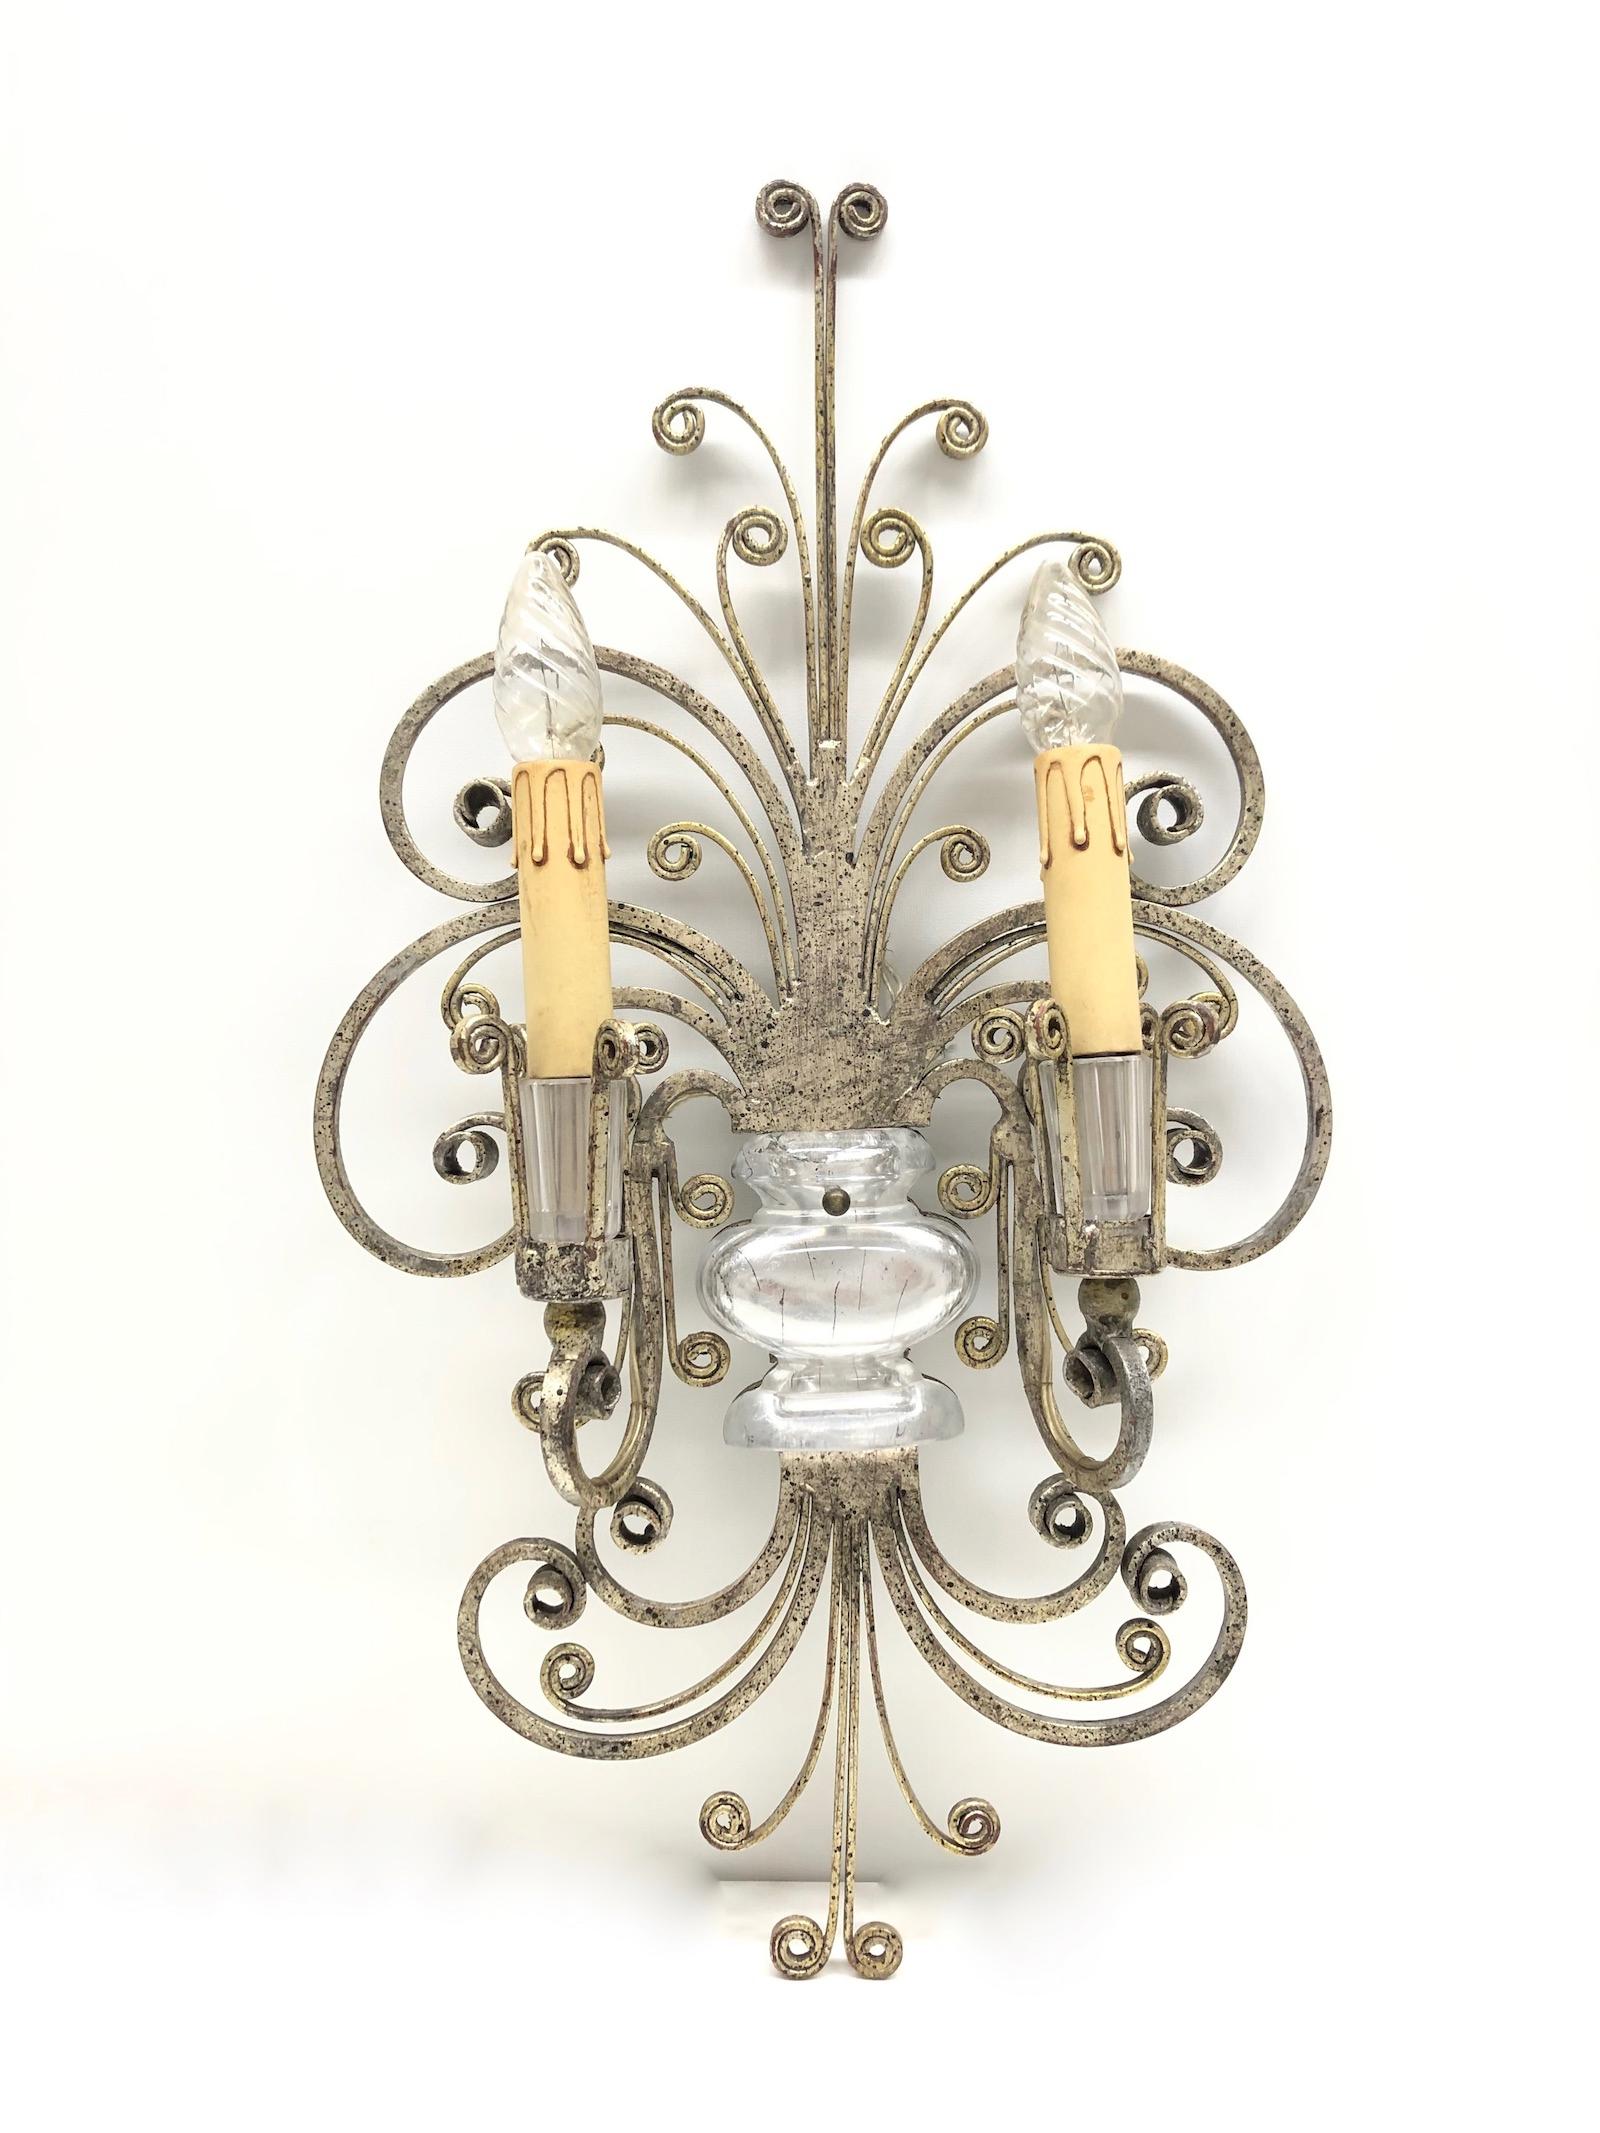 A single silver tone iron floral sconce by Banci Firenze with crystal urn motif, socket cover also made of crystal glass. The fixture requires two European E14 candelabra bulbs, each bulb up to 40 watts. The wall light has a beautiful patina and